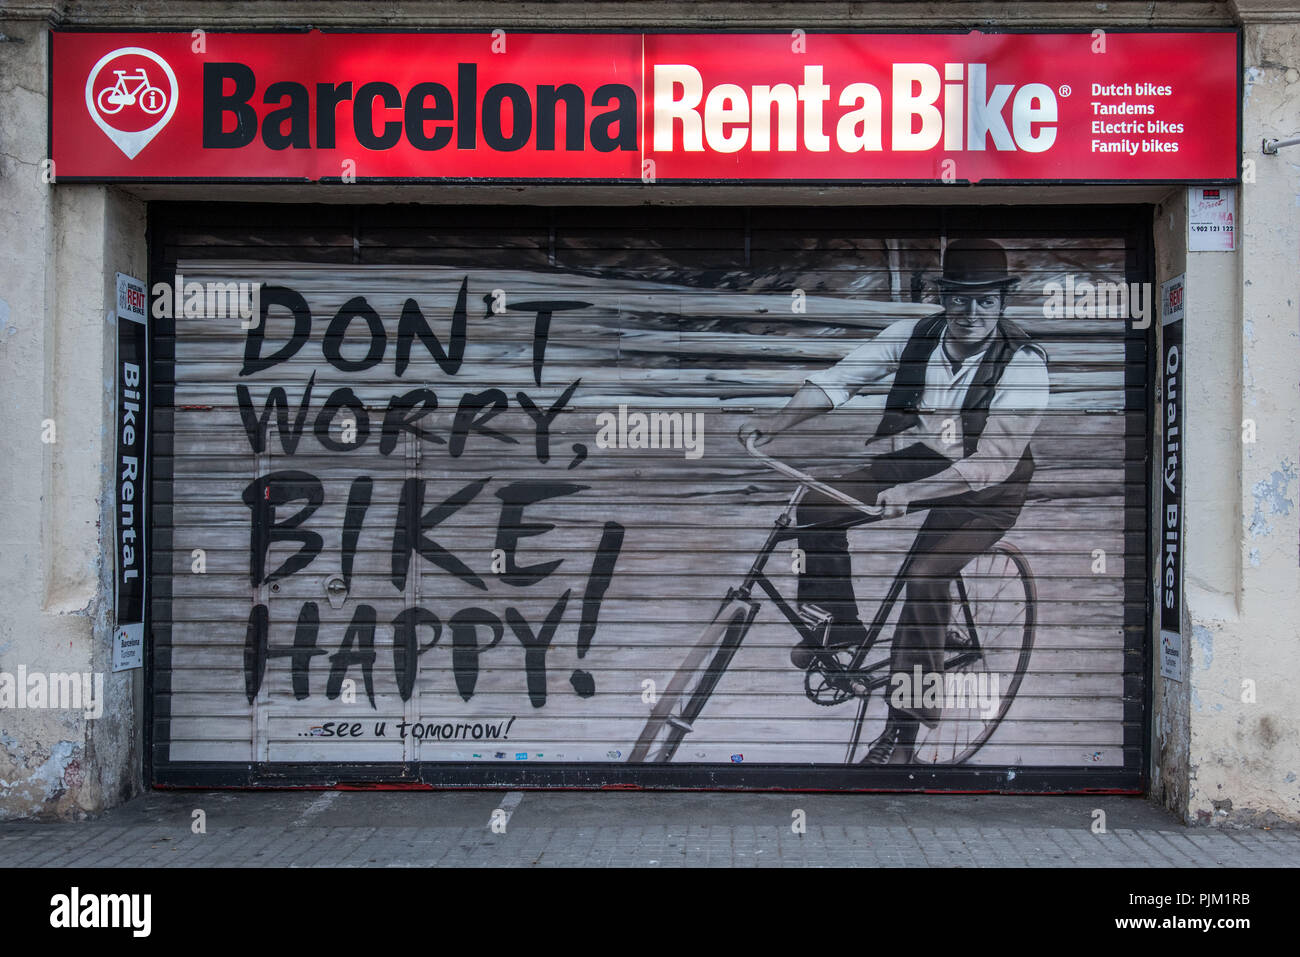 Bike rental in Barcelona after closing time Stock Photo